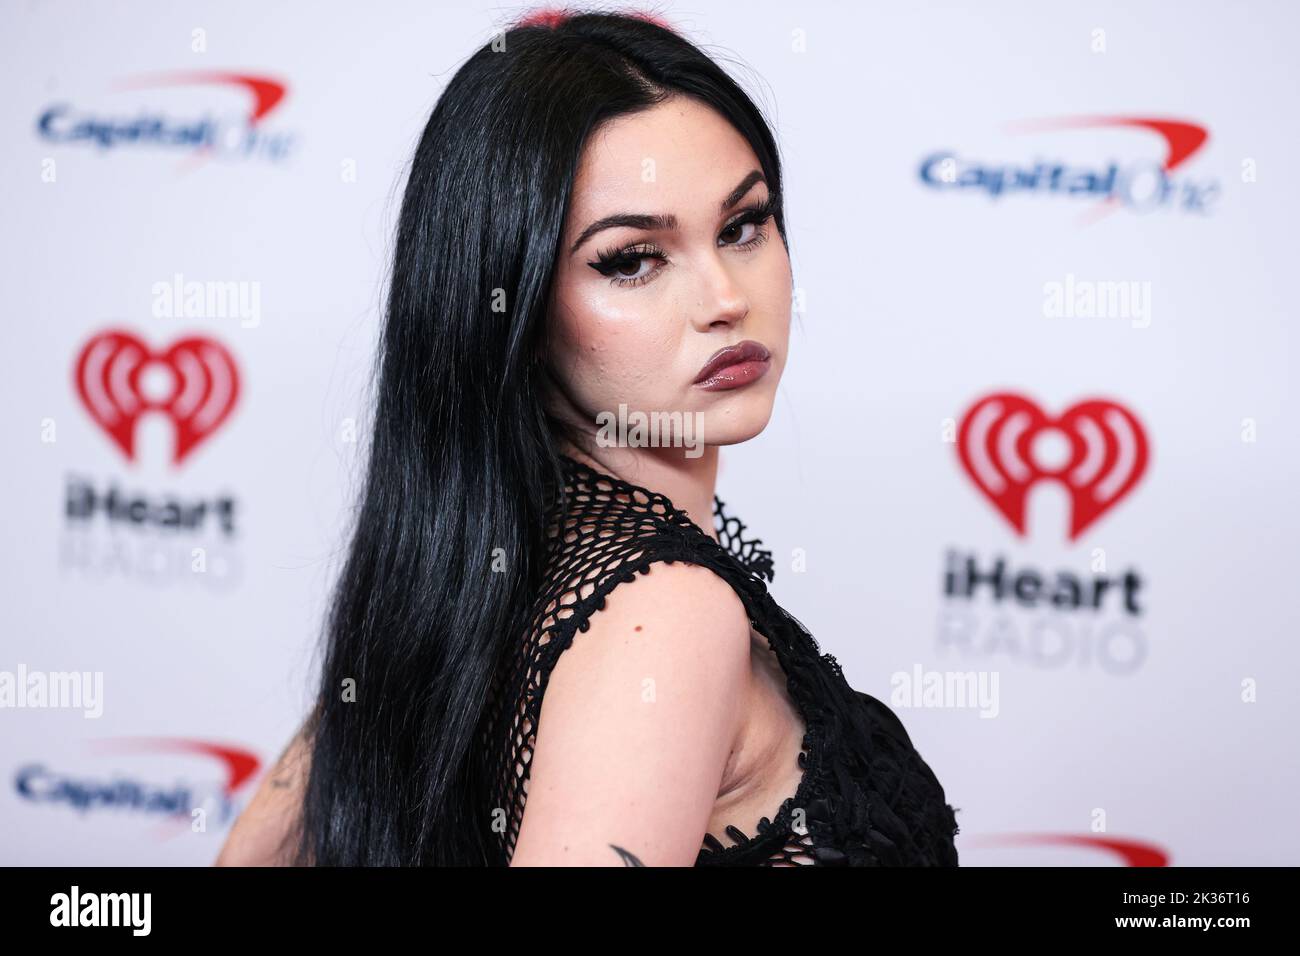 LAS VEGAS, NEVADA, USA - SEPTEMBER 24: Maggie Lindemann poses in the press room at the 2022 iHeartRadio Music Festival - Night 2 held at the T-Mobile Arena on September 24, 2022 in Las Vegas, Nevada, United States. (Photo by Xavier Collin/Image Press Agency) Stock Photo